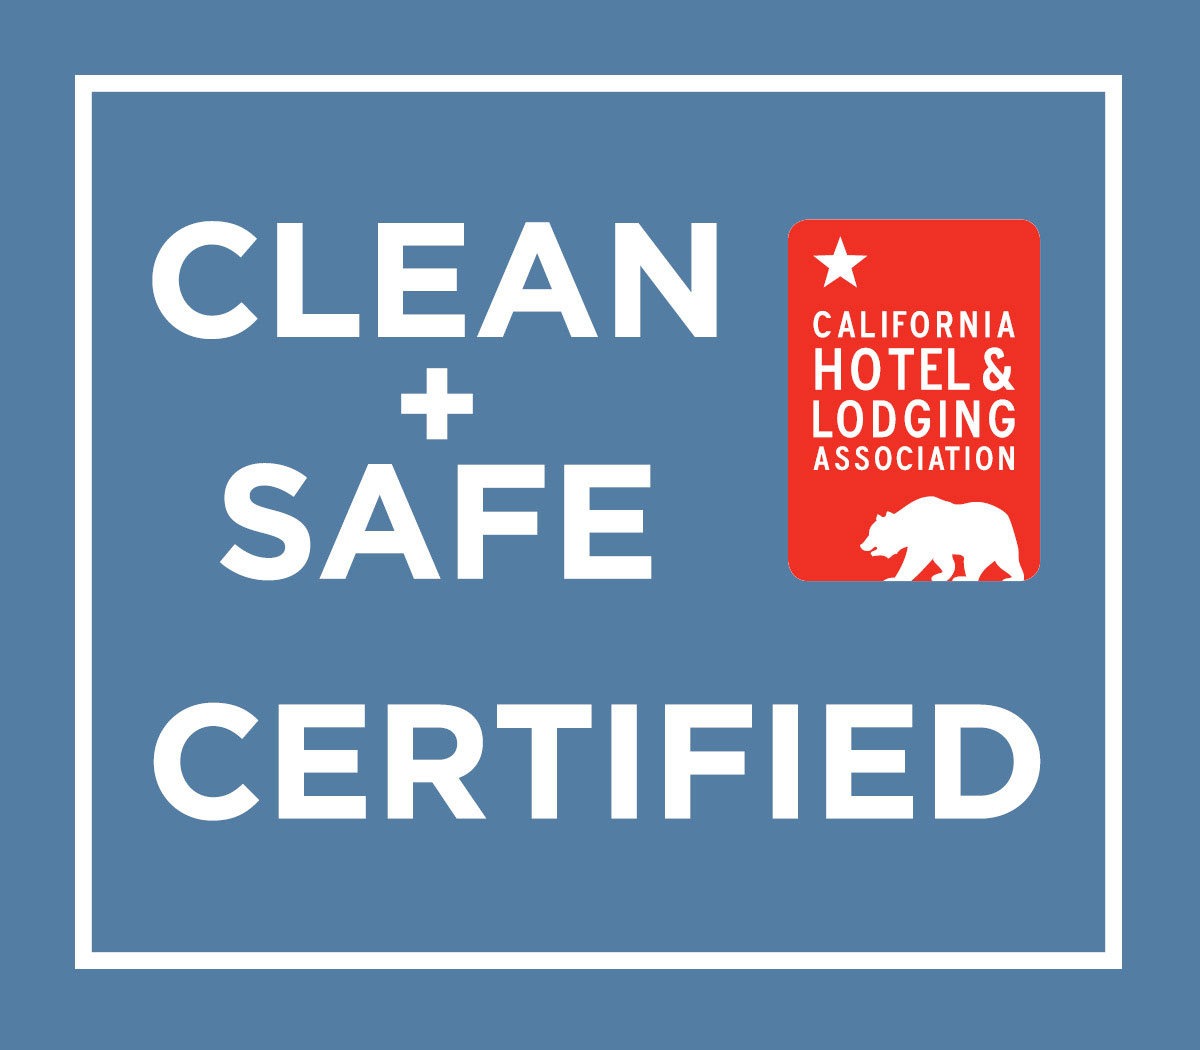 chla cleansafecertified 1200x1050